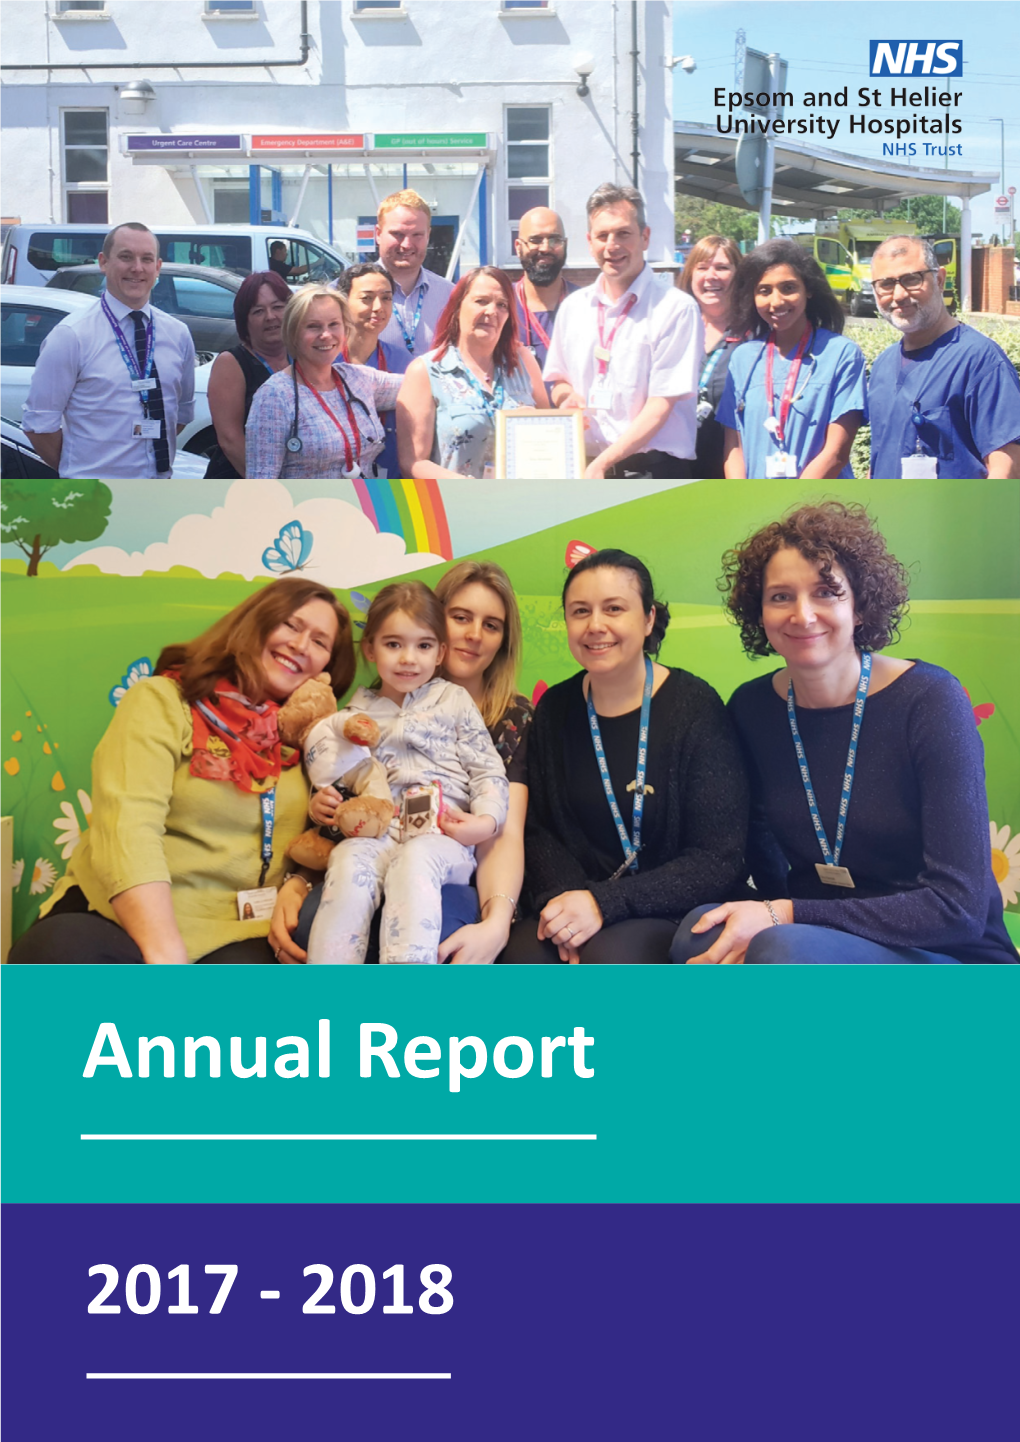 Epsom and St Helier University Hospitals NHS Trust: Annual Report